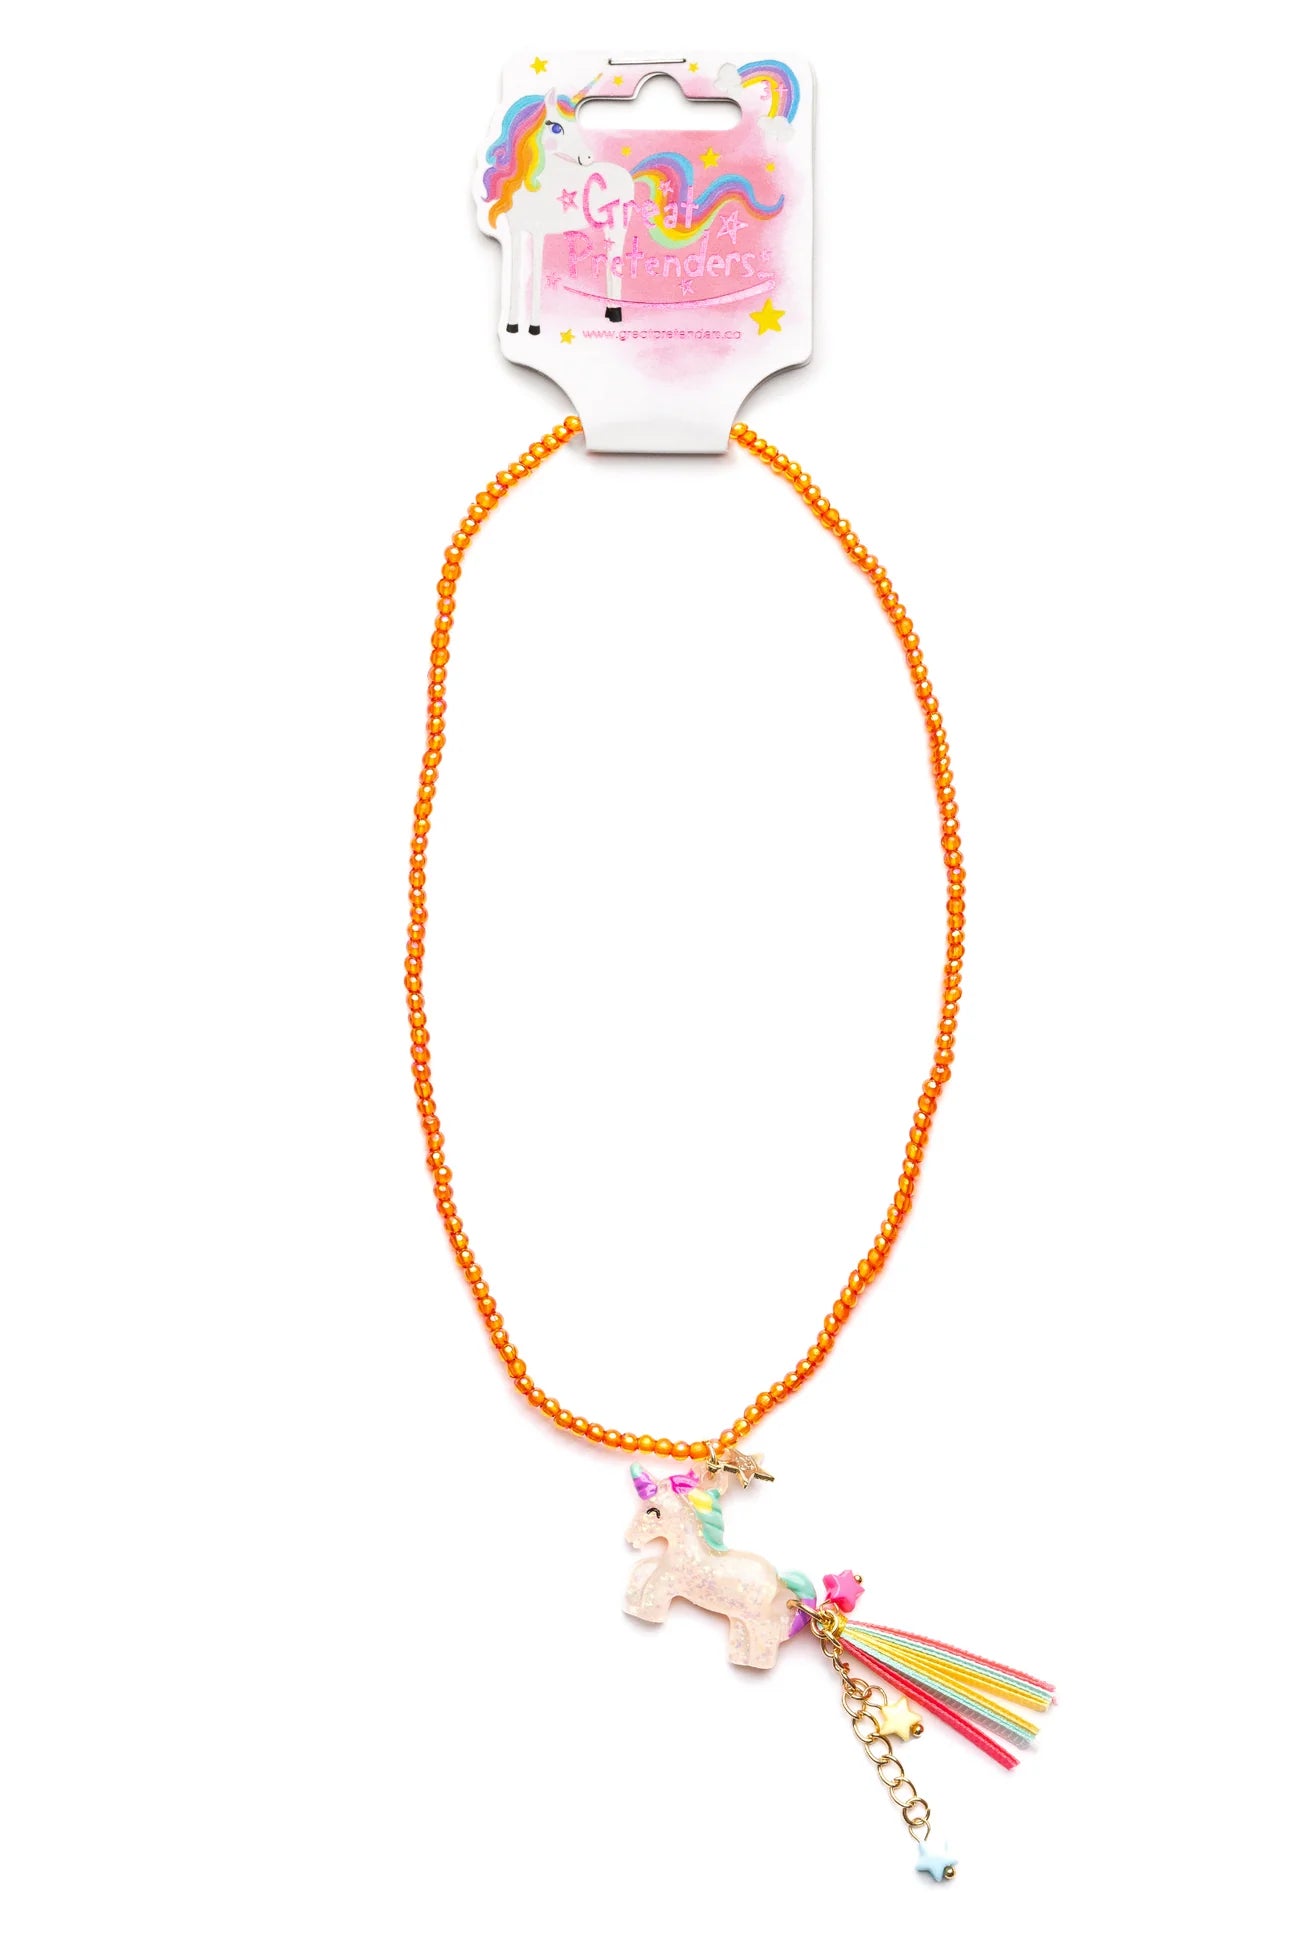 Unicorn Superstar Necklace by Great Pretenders # 86158